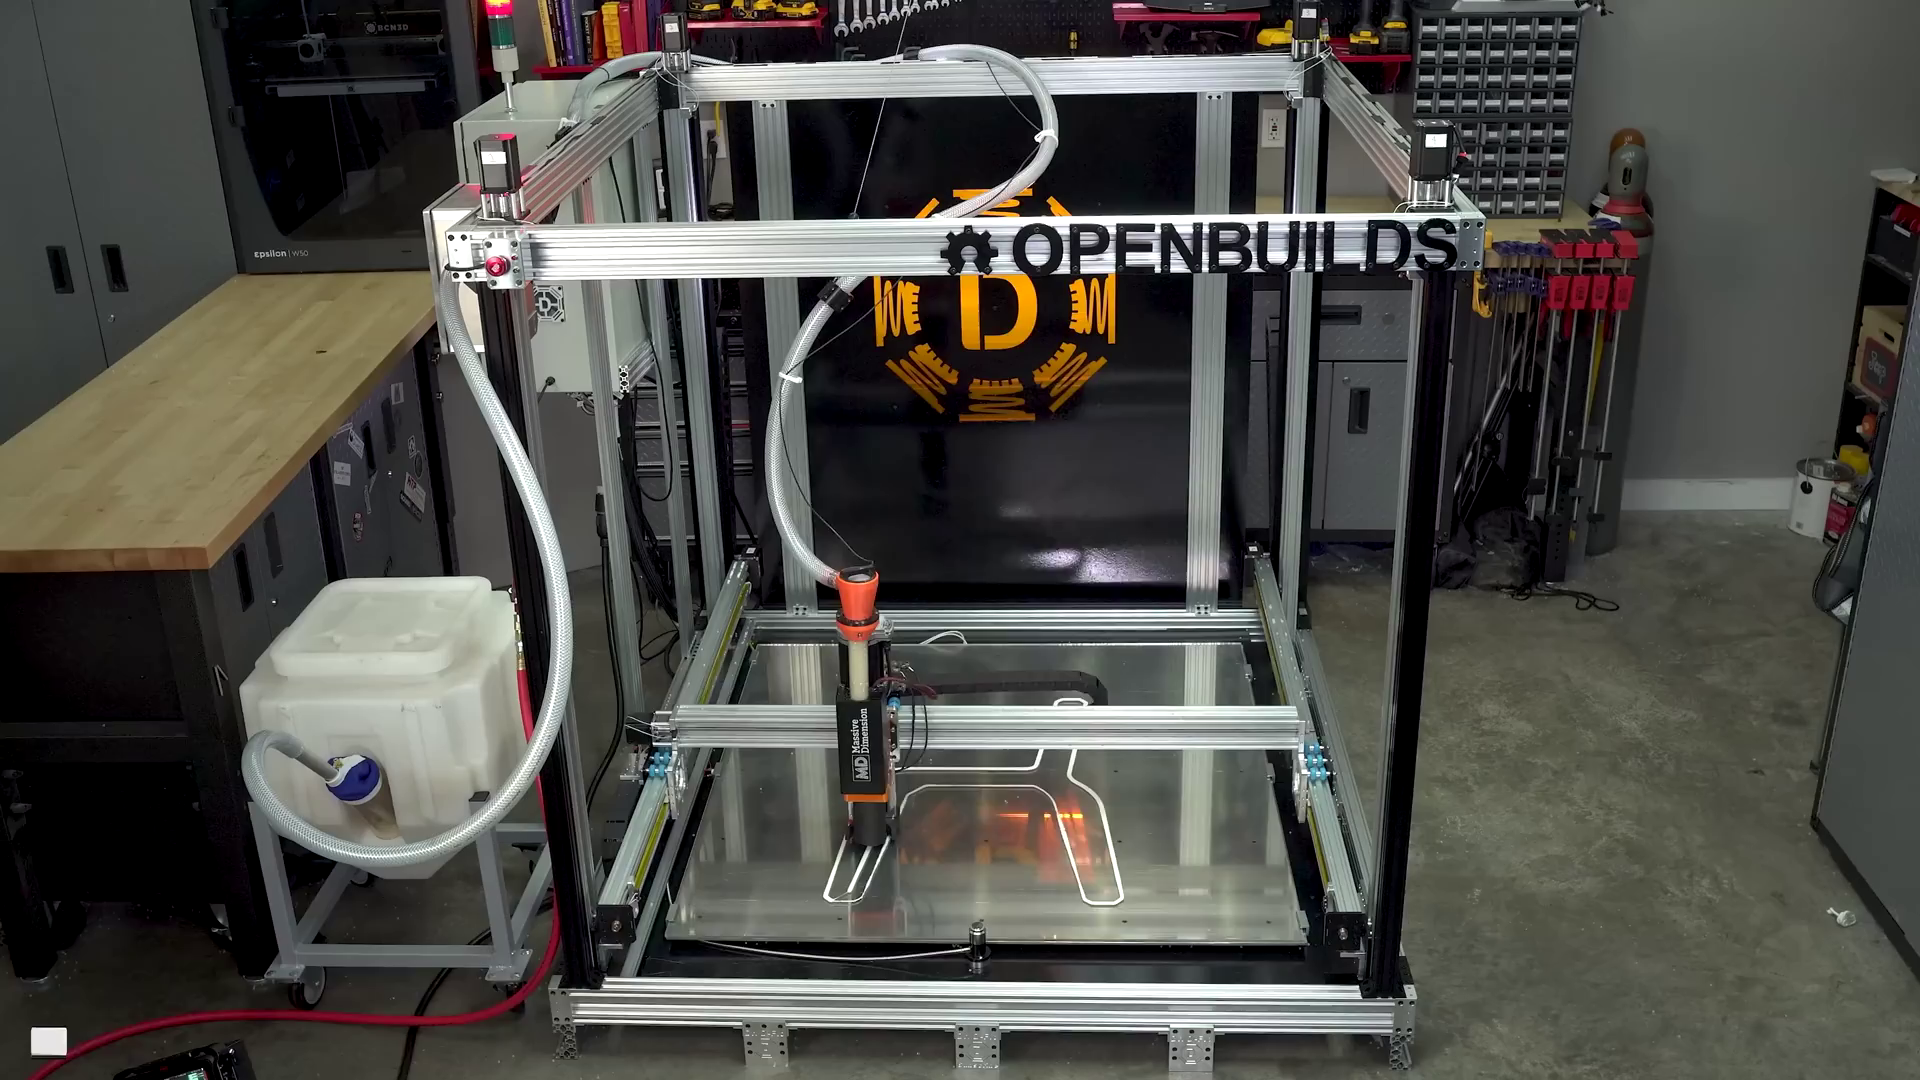 The large-format 3D printer is a serious engineering challenge